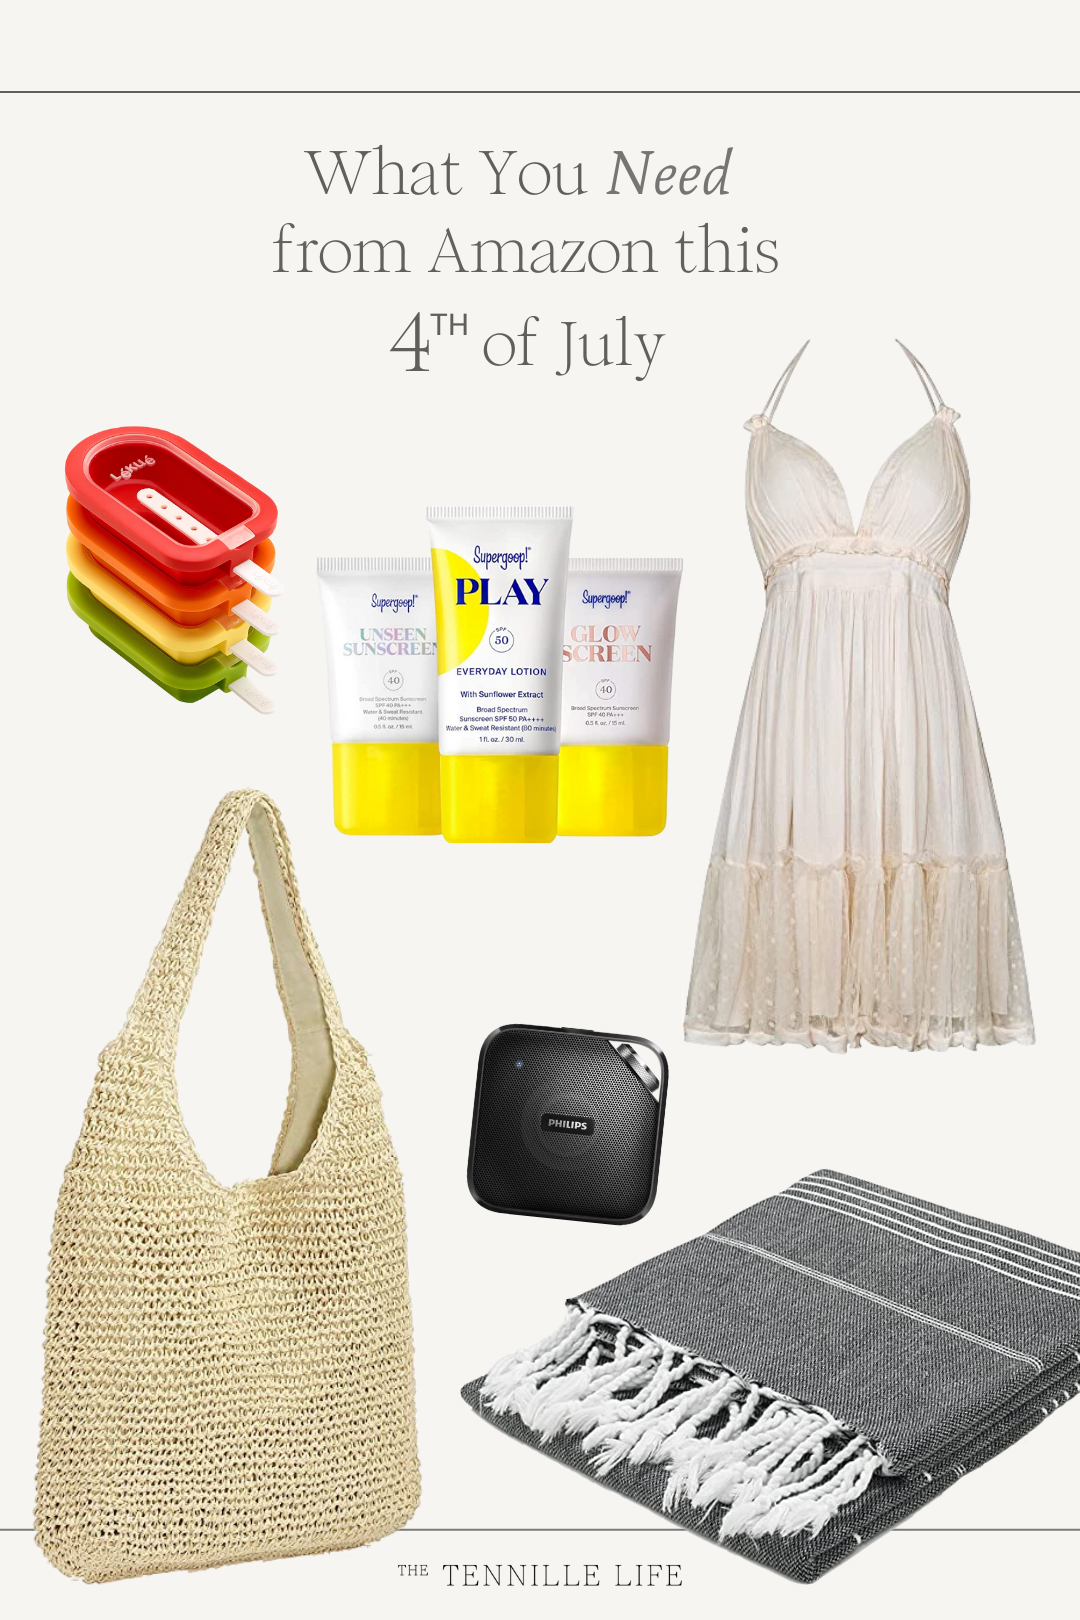 4th of July Essentials on Amazon